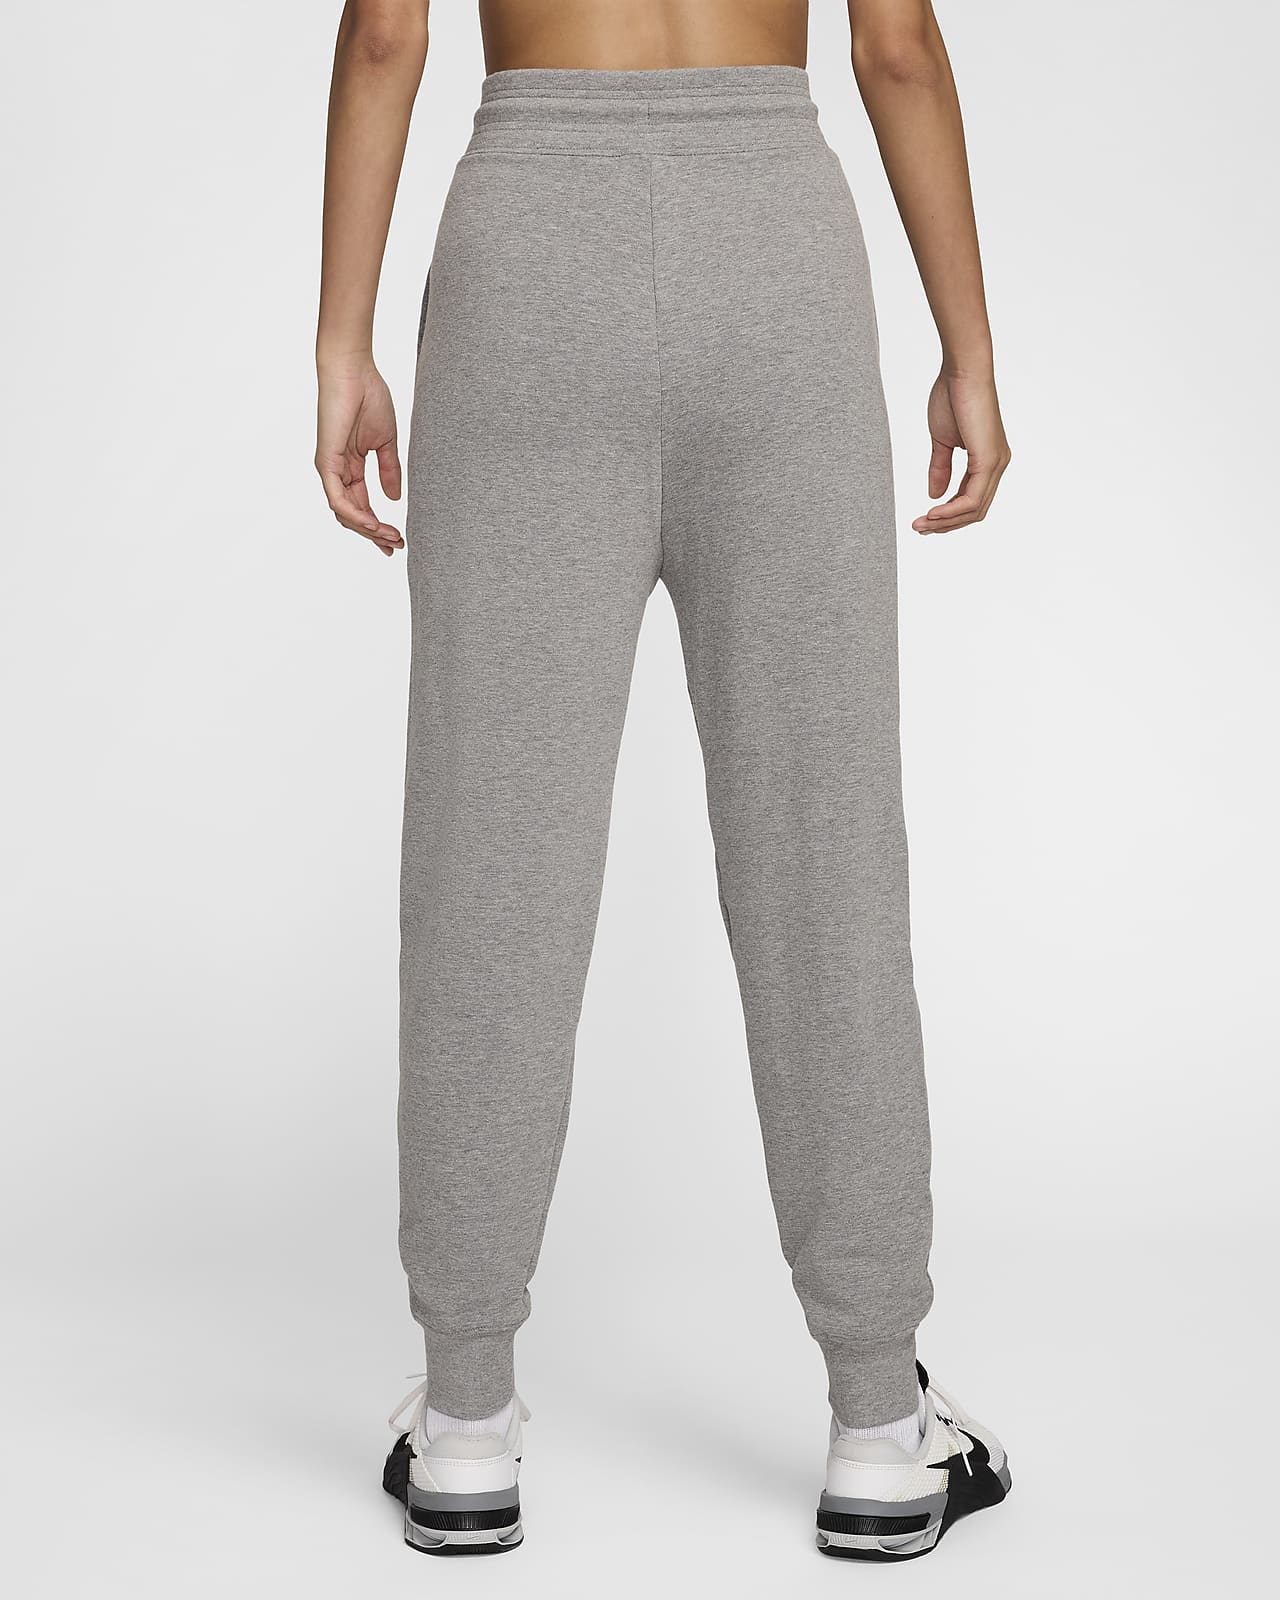 Buy Navy Blue Track Pants for Women by NIKE Online | Ajio.com